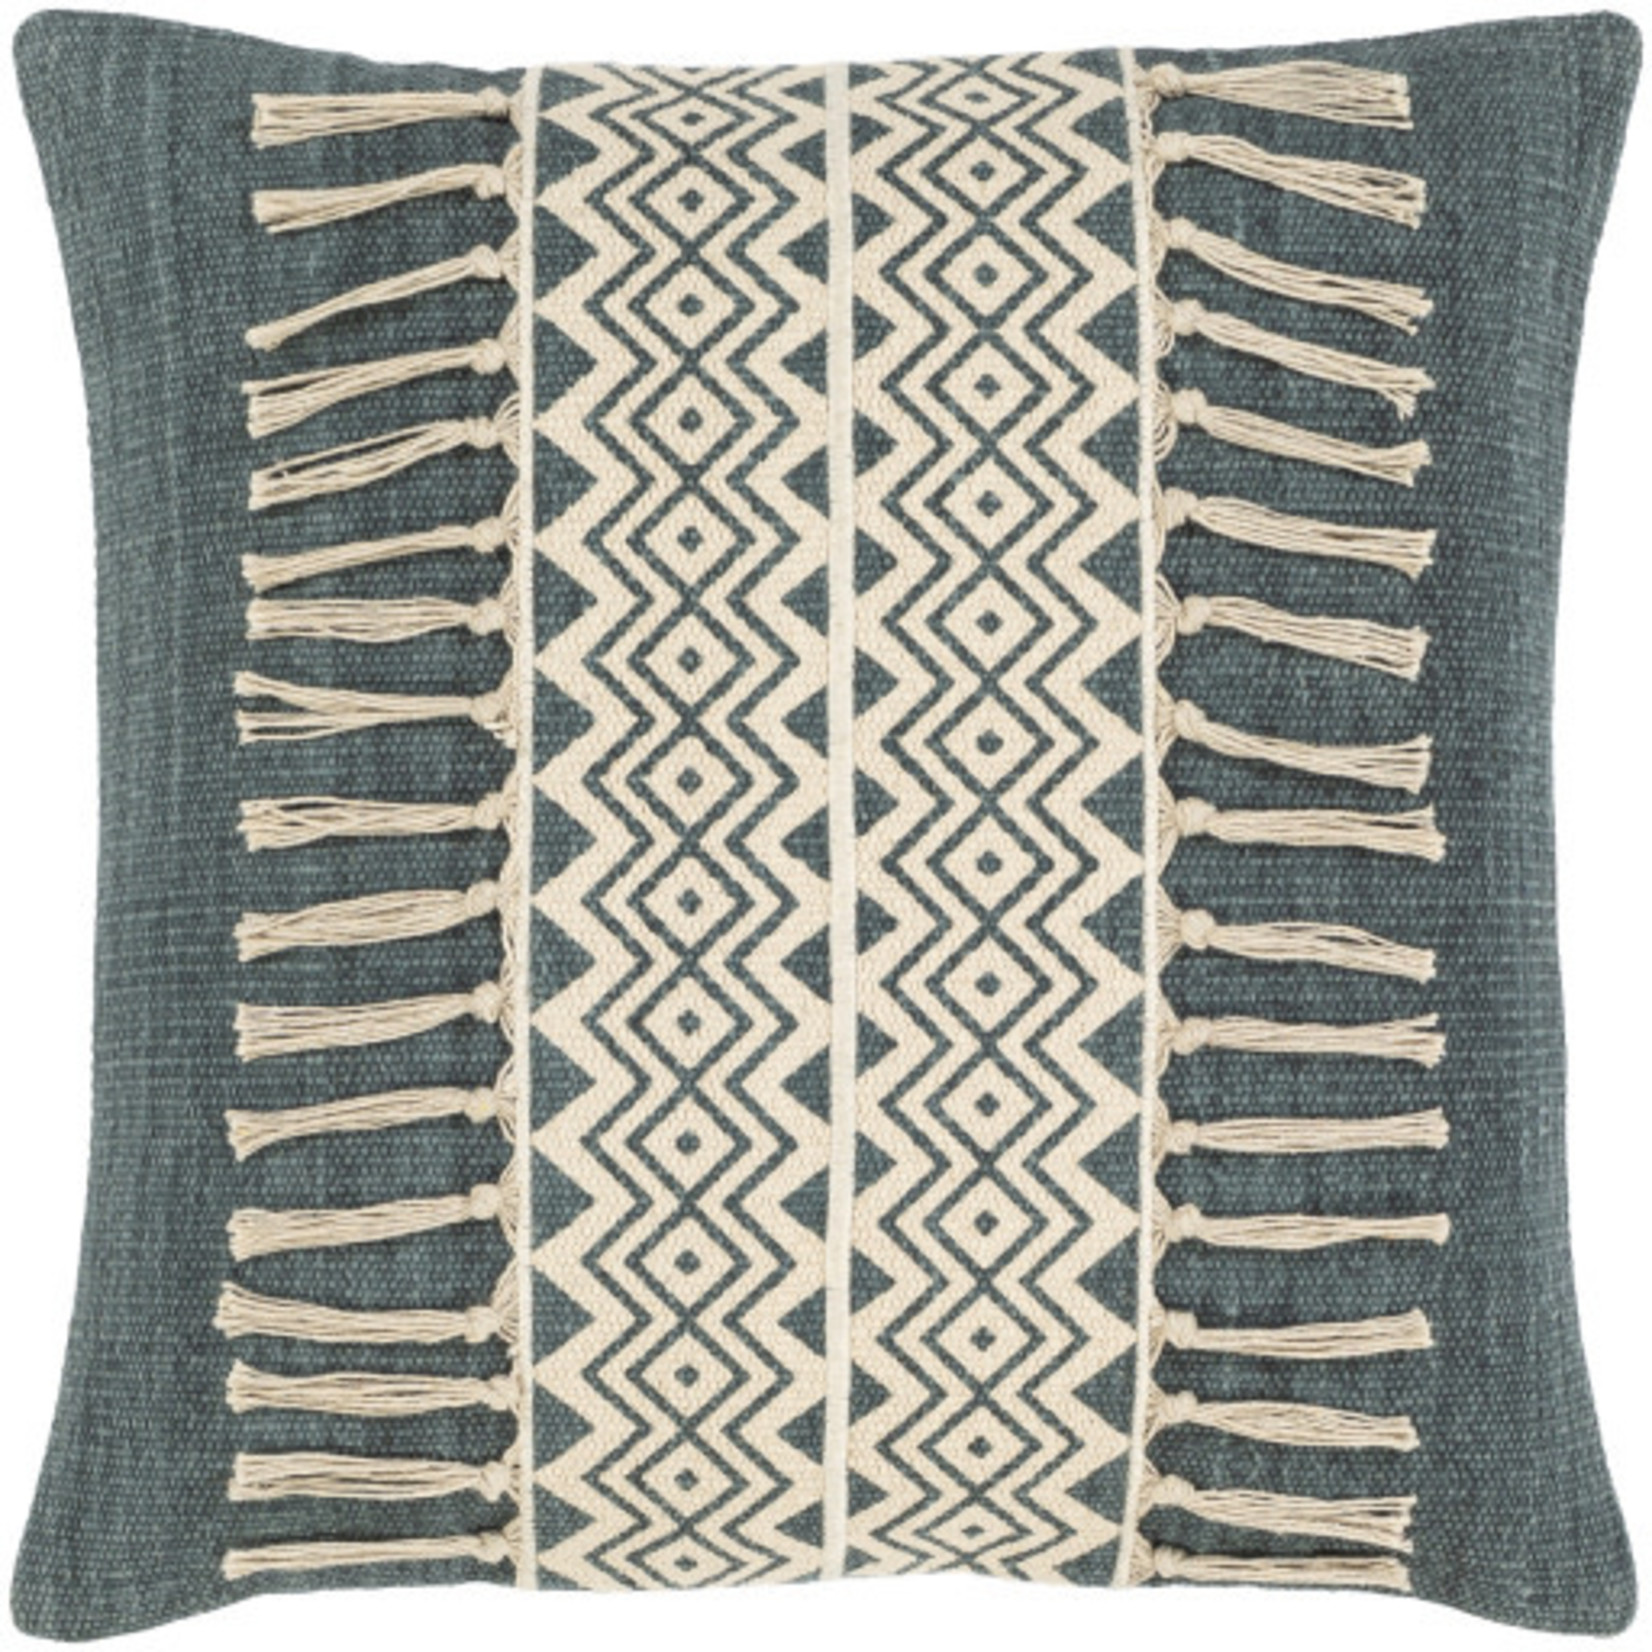 Mickler & Co. Tanny Turquoise Pillow with Tassels